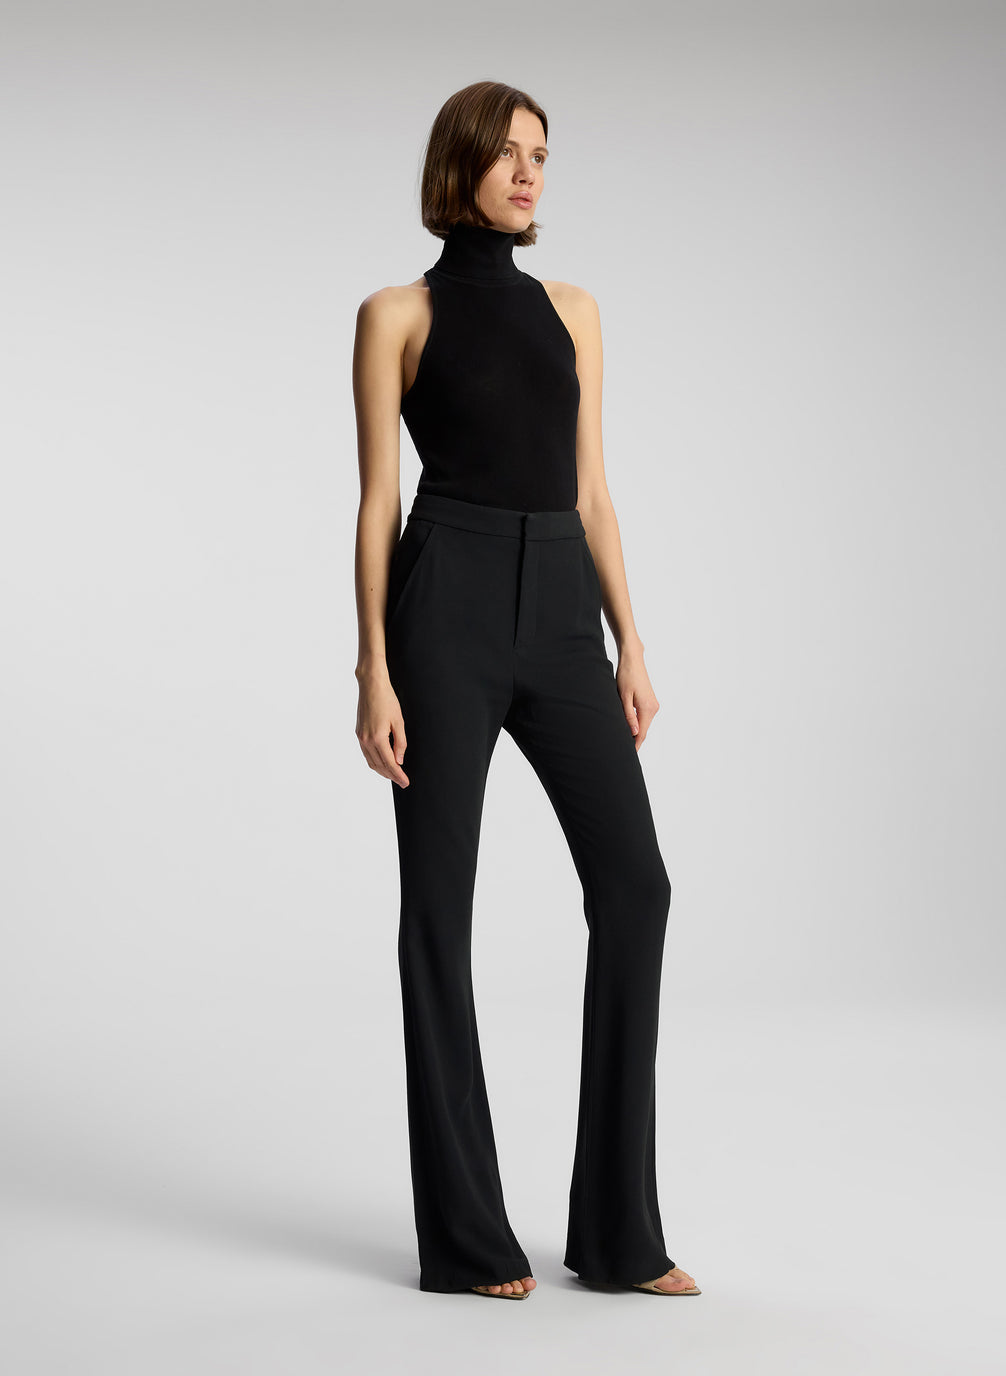 side view of woman wearing black sleeveless turtleneck and black pants